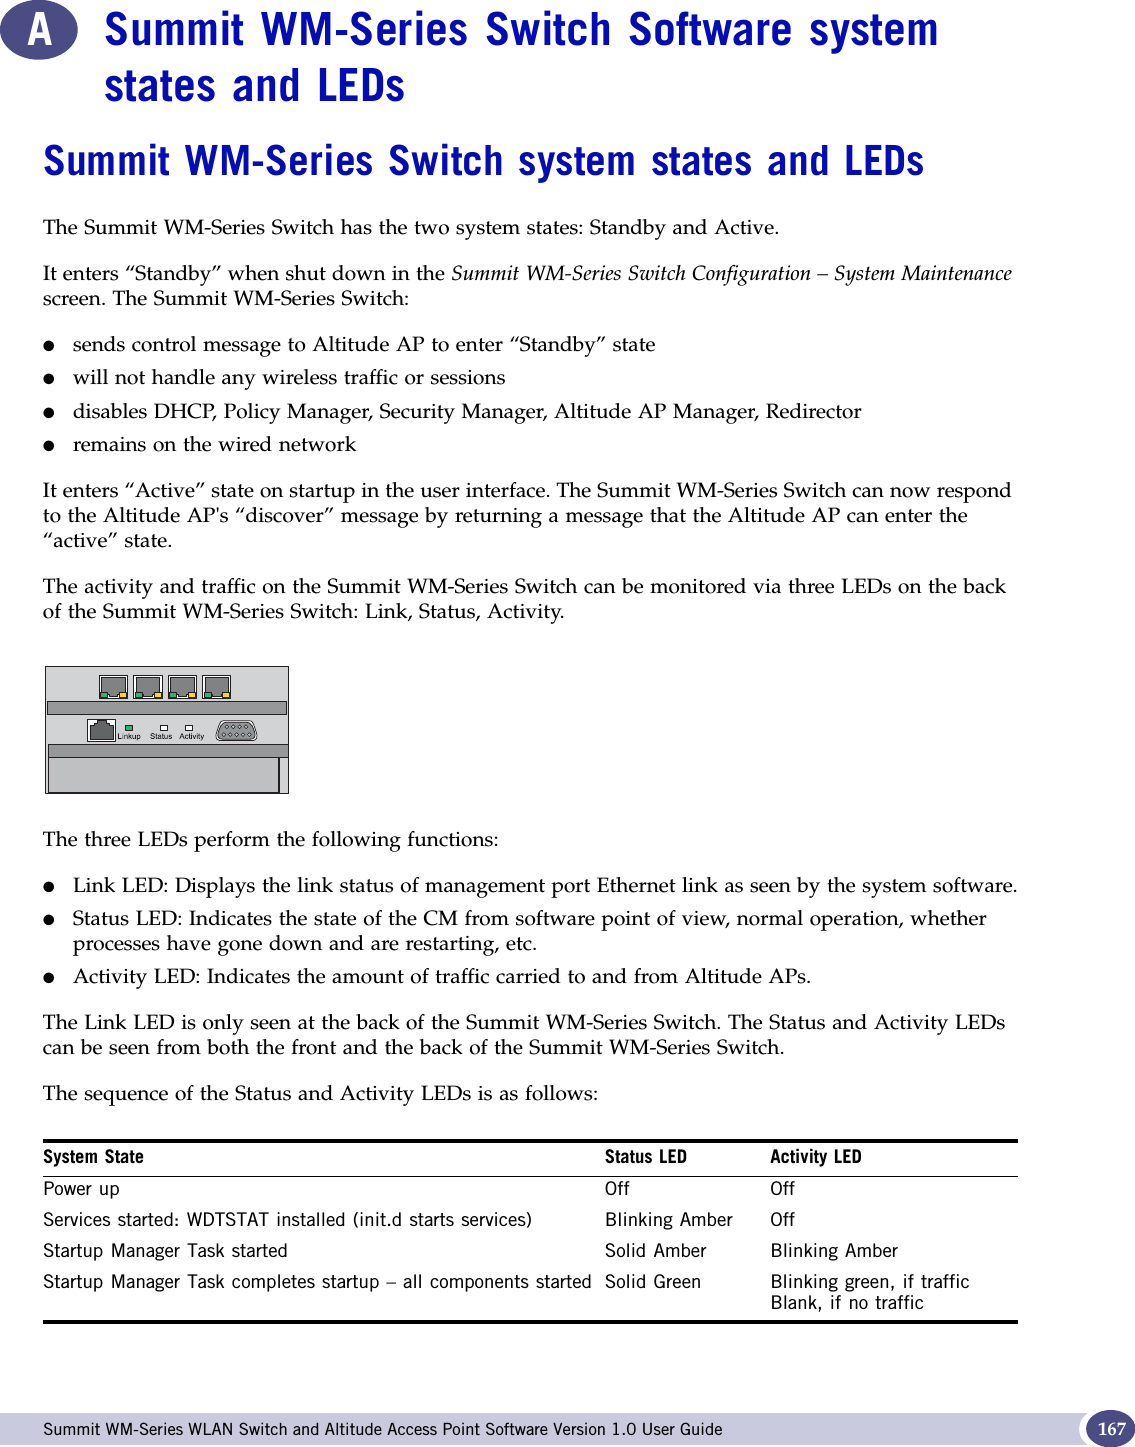  Summit WM-Series WLAN Switch and Altitude Access Point Software Version 1.0 User Guide 167ASummit WM-Series Switch Software system states and LEDsSummit WM-Series Switch system states and LEDsThe Summit WM-Series Switch has the two system states: Standby and Active.It enters “Standby” when shut down in the Summit WM-Series Switch Configuration – System Maintenancescreen. The Summit WM-Series Switch:●sends control message to Altitude AP to enter “Standby” state●will not handle any wireless traffic or sessions●disables DHCP, Policy Manager, Security Manager, Altitude AP Manager, Redirector●remains on the wired networkIt enters “Active” state on startup in the user interface. The Summit WM-Series Switch can now respond to the Altitude AP&apos;s “discover” message by returning a message that the Altitude AP can enter the “active” state.The activity and traffic on the Summit WM-Series Switch can be monitored via three LEDs on the back of the Summit WM-Series Switch: Link, Status, Activity.The three LEDs perform the following functions:●Link LED: Displays the link status of management port Ethernet link as seen by the system software.●Status LED: Indicates the state of the CM from software point of view, normal operation, whether processes have gone down and are restarting, etc.●Activity LED: Indicates the amount of traffic carried to and from Altitude APs.The Link LED is only seen at the back of the Summit WM-Series Switch. The Status and Activity LEDs can be seen from both the front and the back of the Summit WM-Series Switch. The sequence of the Status and Activity LEDs is as follows:System State Status LED Activity LEDPower up Off OffServices started: WDTSTAT installed (init.d starts services) Blinking Amber OffStartup Manager Task started Solid Amber Blinking AmberStartup Manager Task completes startup – all components started Solid Green Blinking green, if trafficBlank, if no traffic